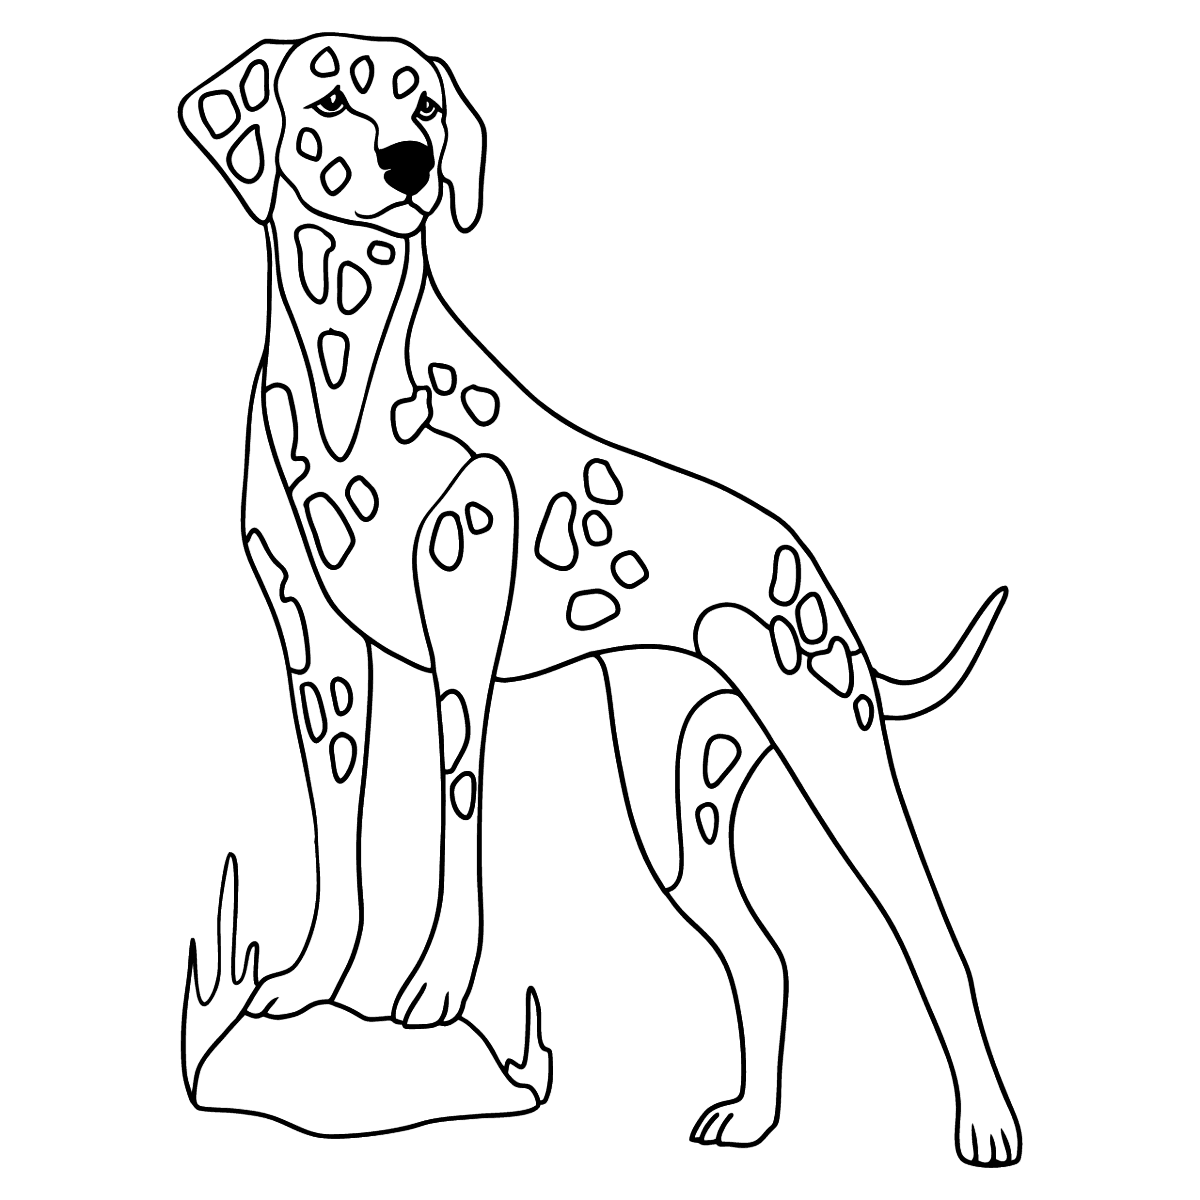 Dalmatian coloring page ♥ Print for Free!